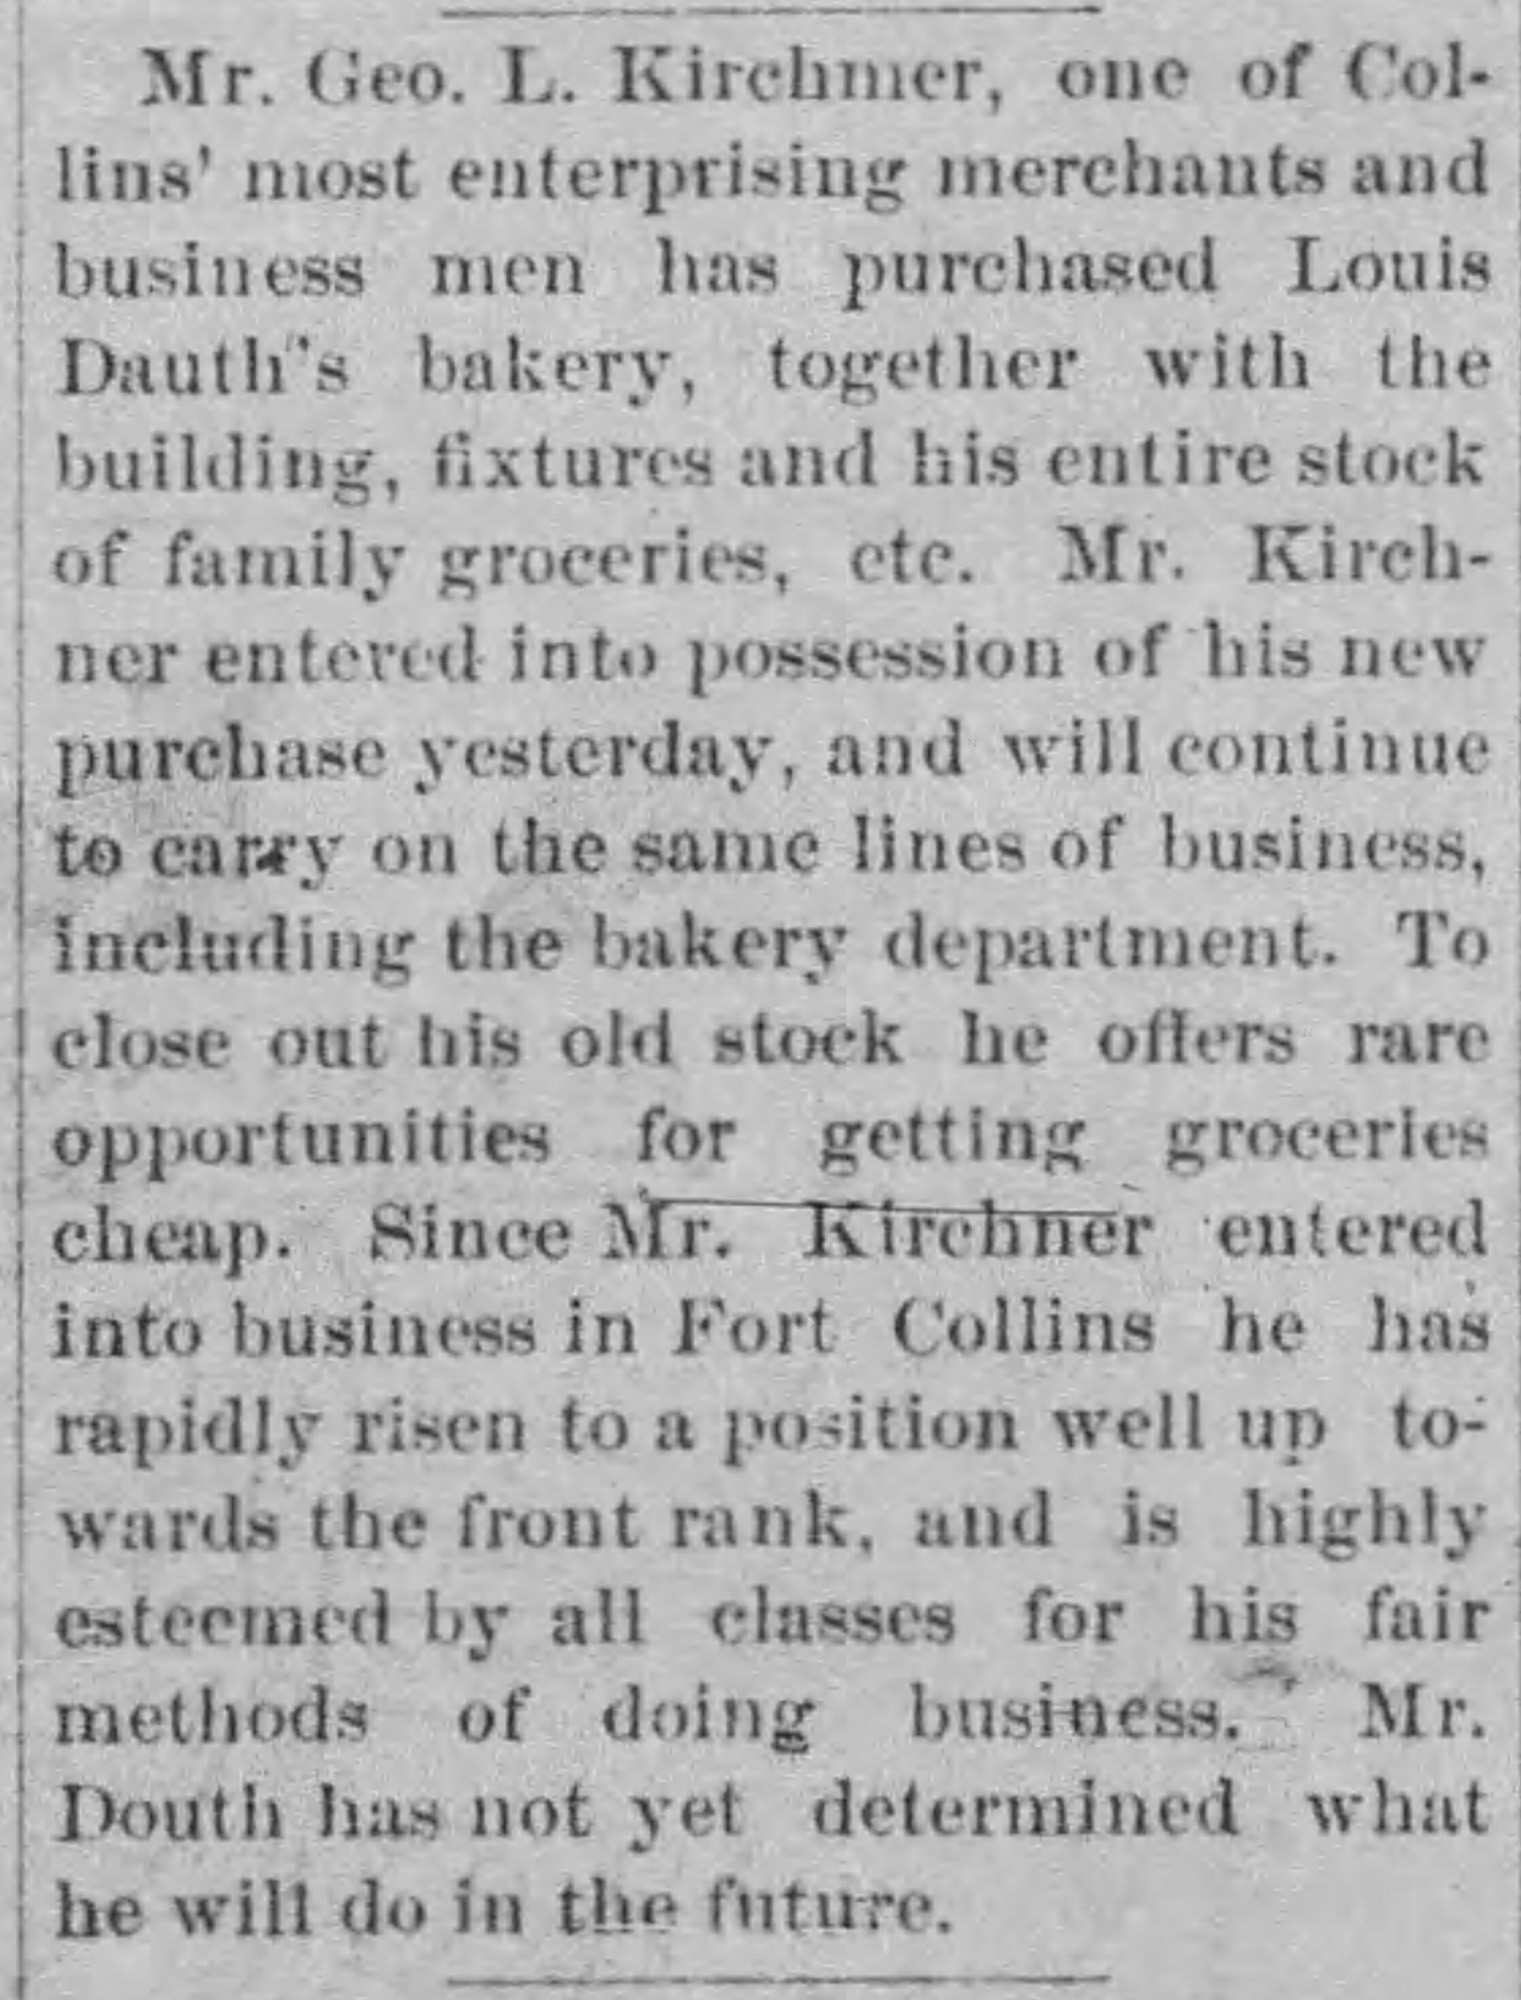 Dauth Family Archive - 1881-02-17 - The Fort Collins Courier - Louis Dauth Sells Bakery